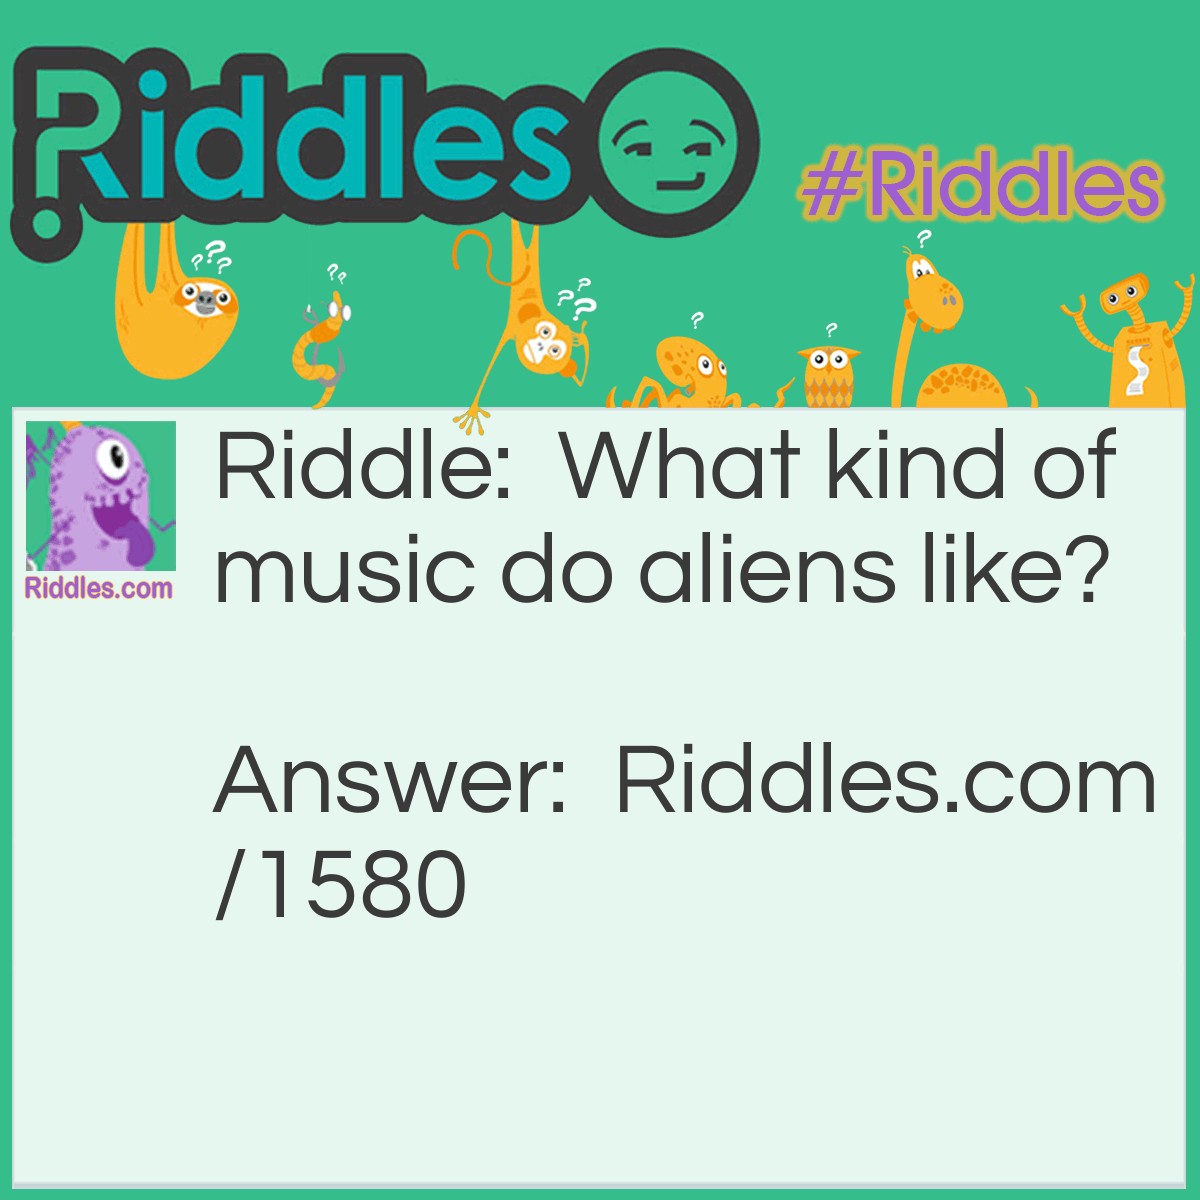 Riddle: What kind of music do aliens like? Answer: Nep-tunes.